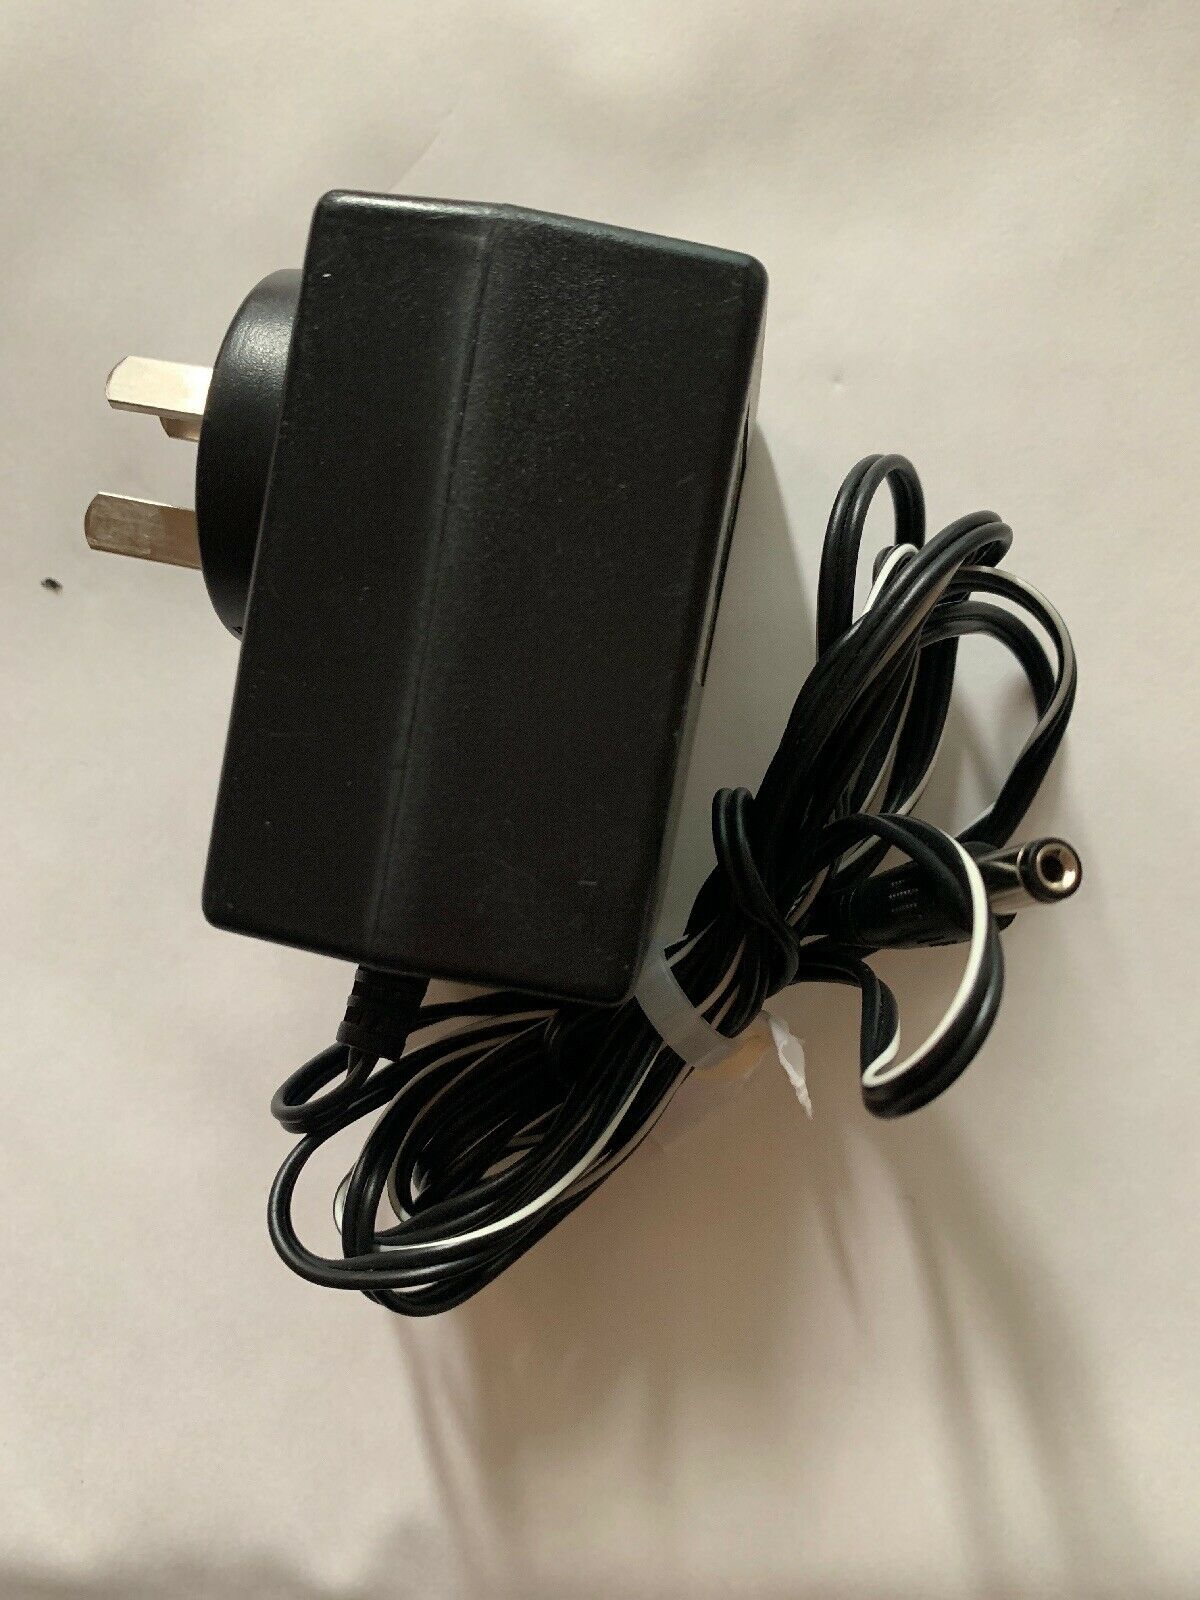 NEW Ahead JAD-0900300AS AC Adapter 9VDC 300mA power supply charger